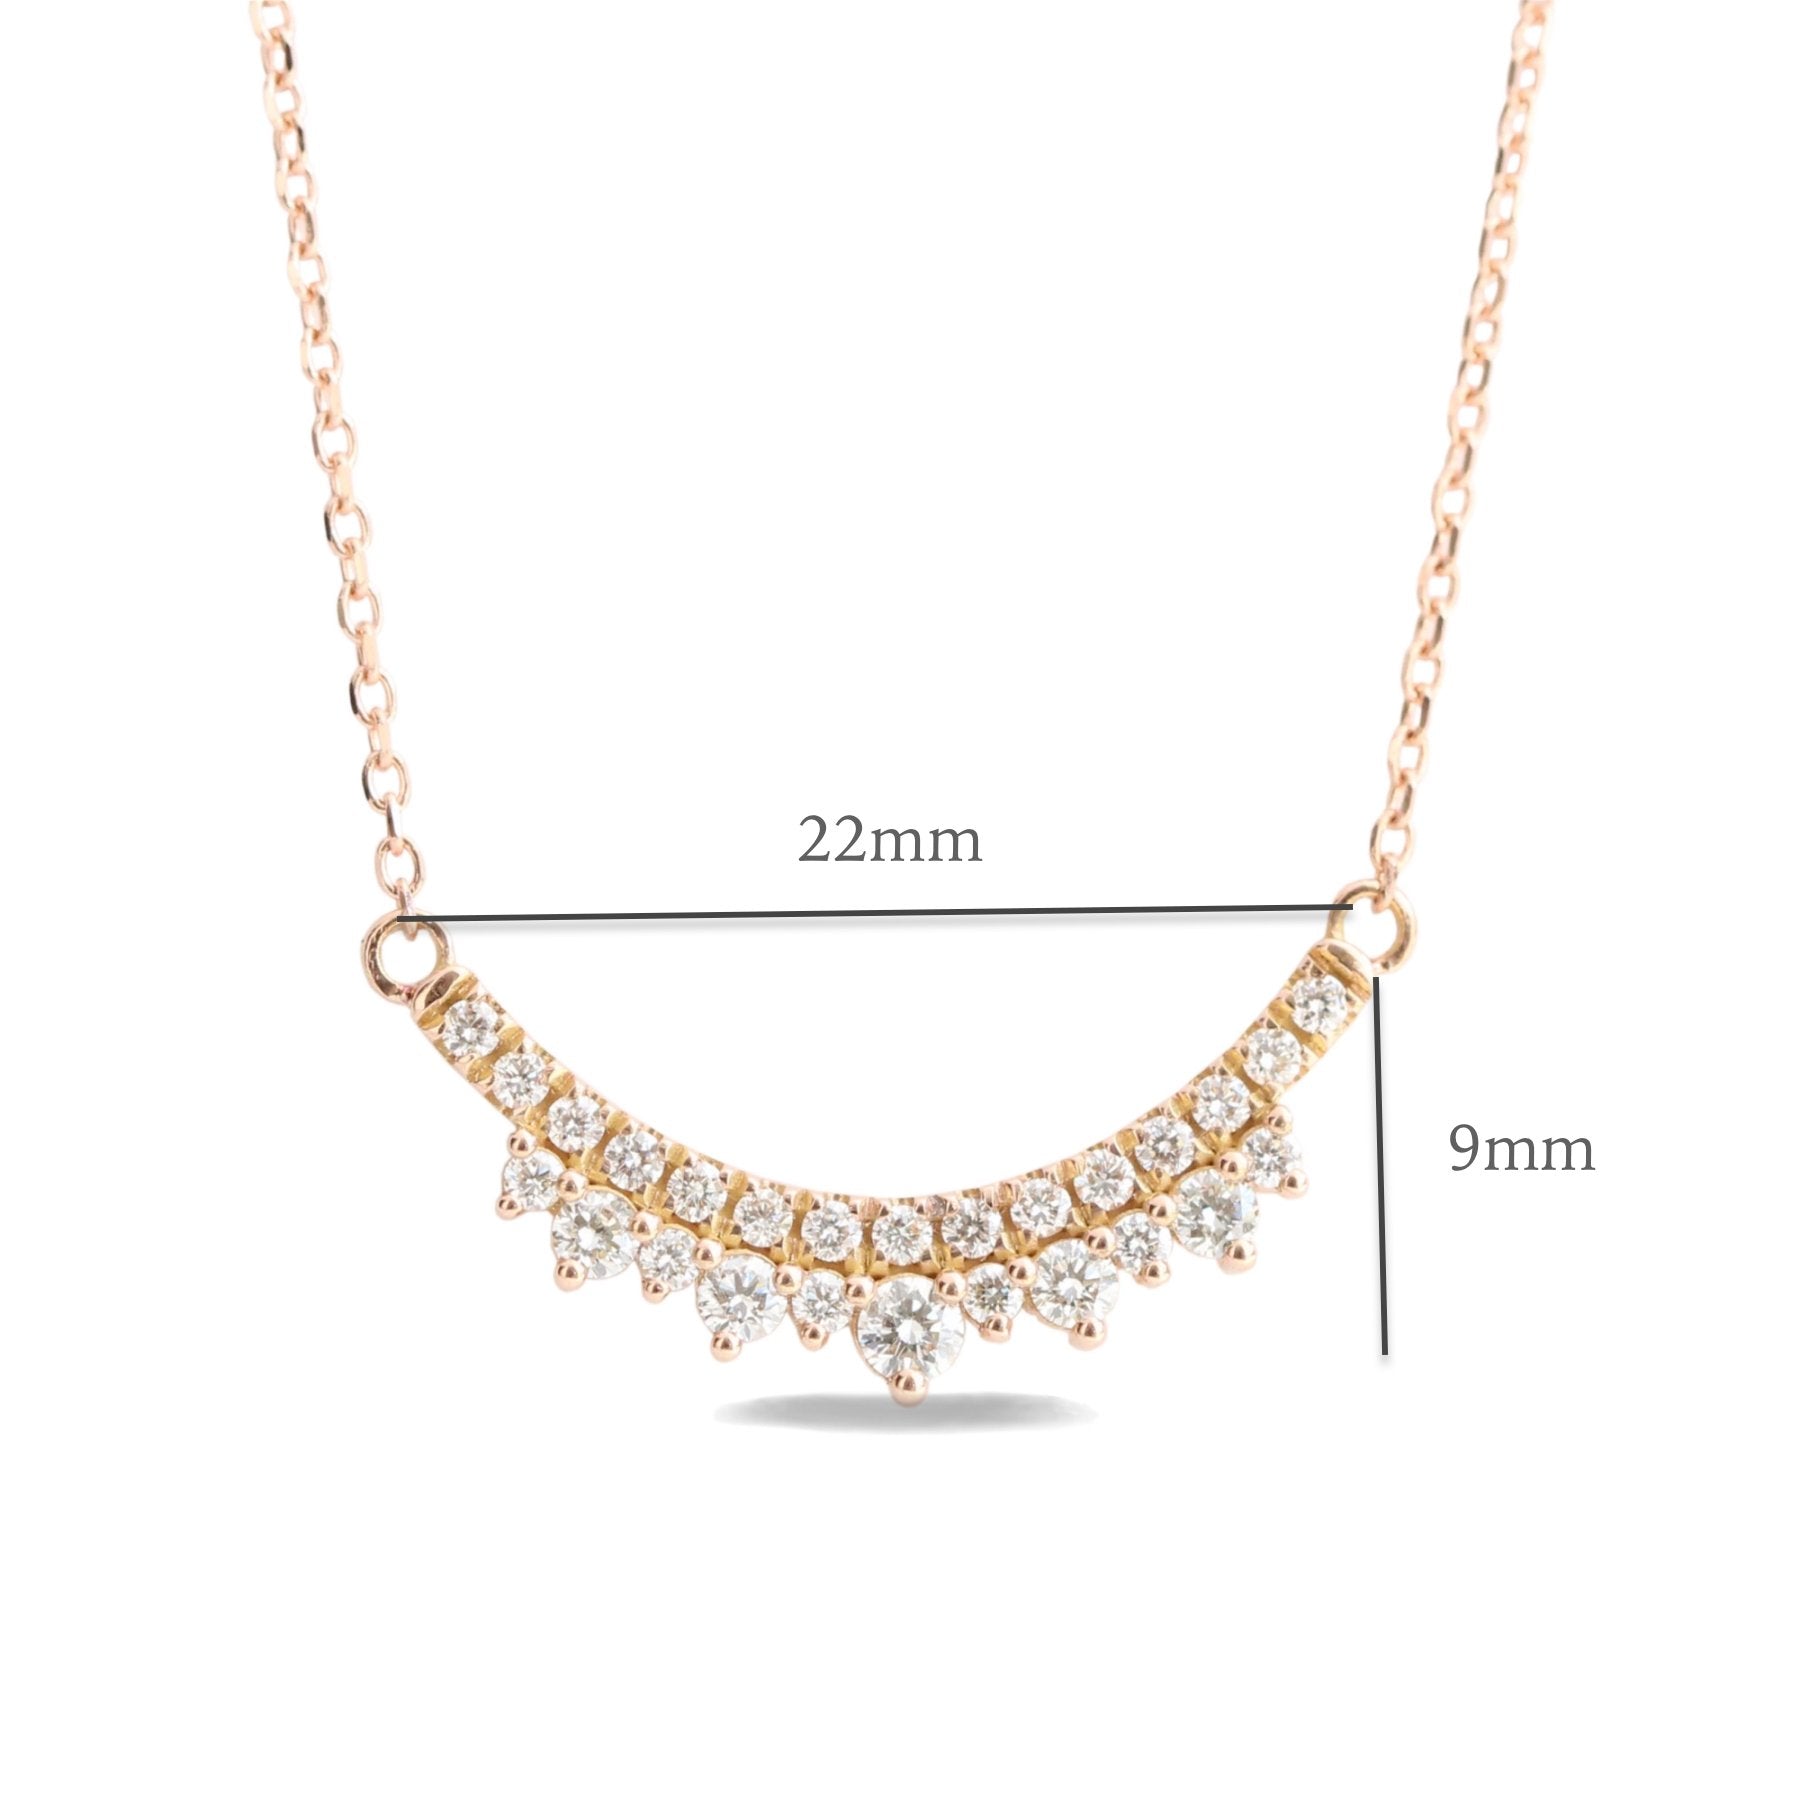 necklace gold, necklace chain, necklace for men, necklace with name, necklace set, necklace design, necklace for women, necklace diamond, necklace length, necklace silver, necklace extender, necklace for girlfriend,